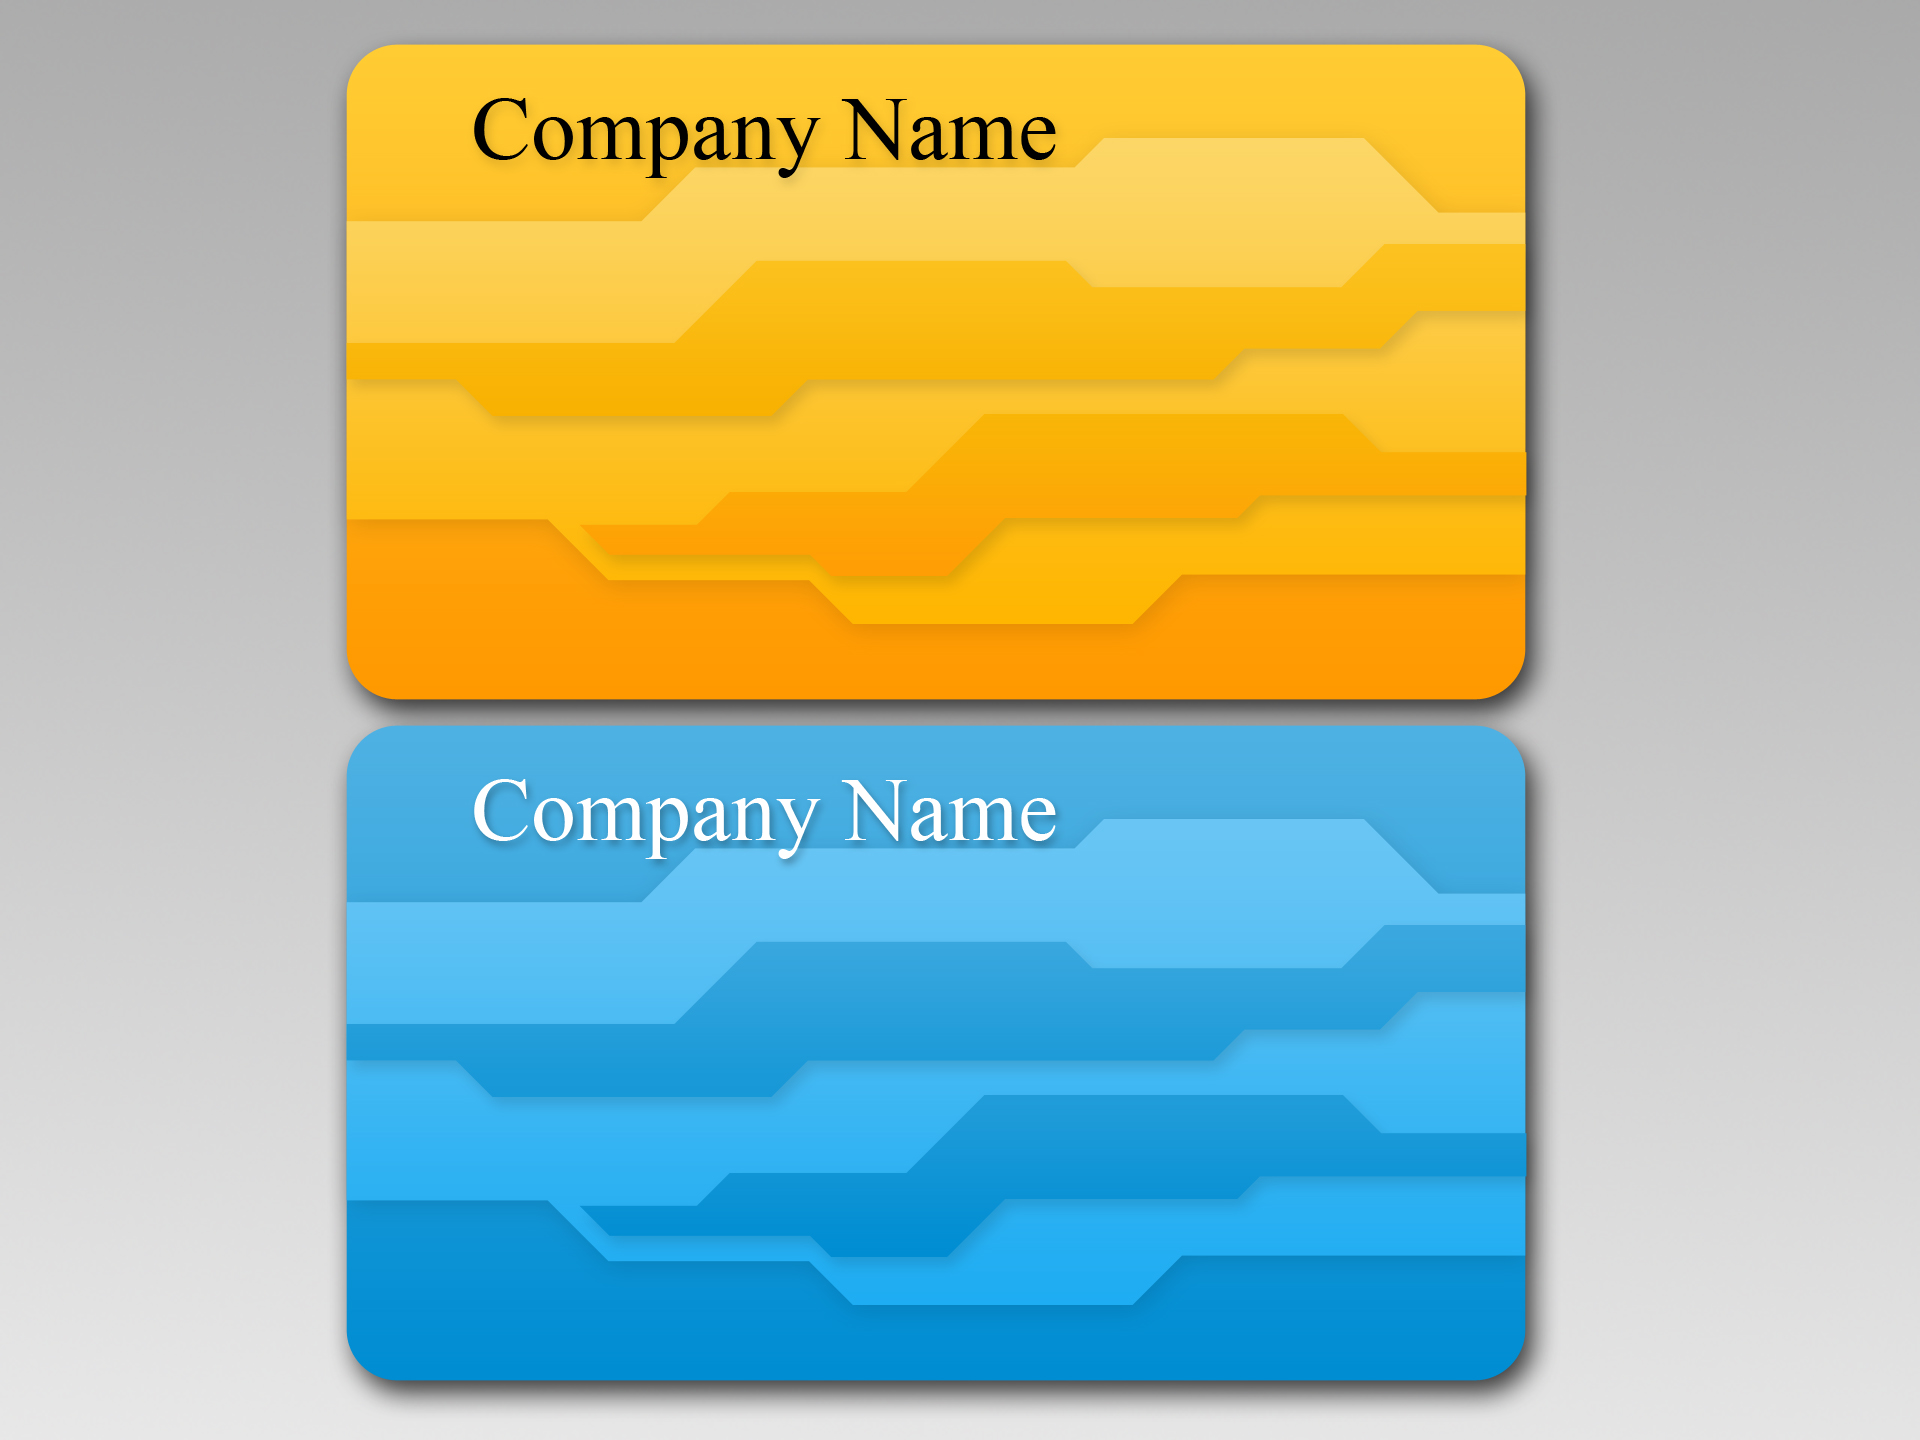 Business Card Template Photoshop